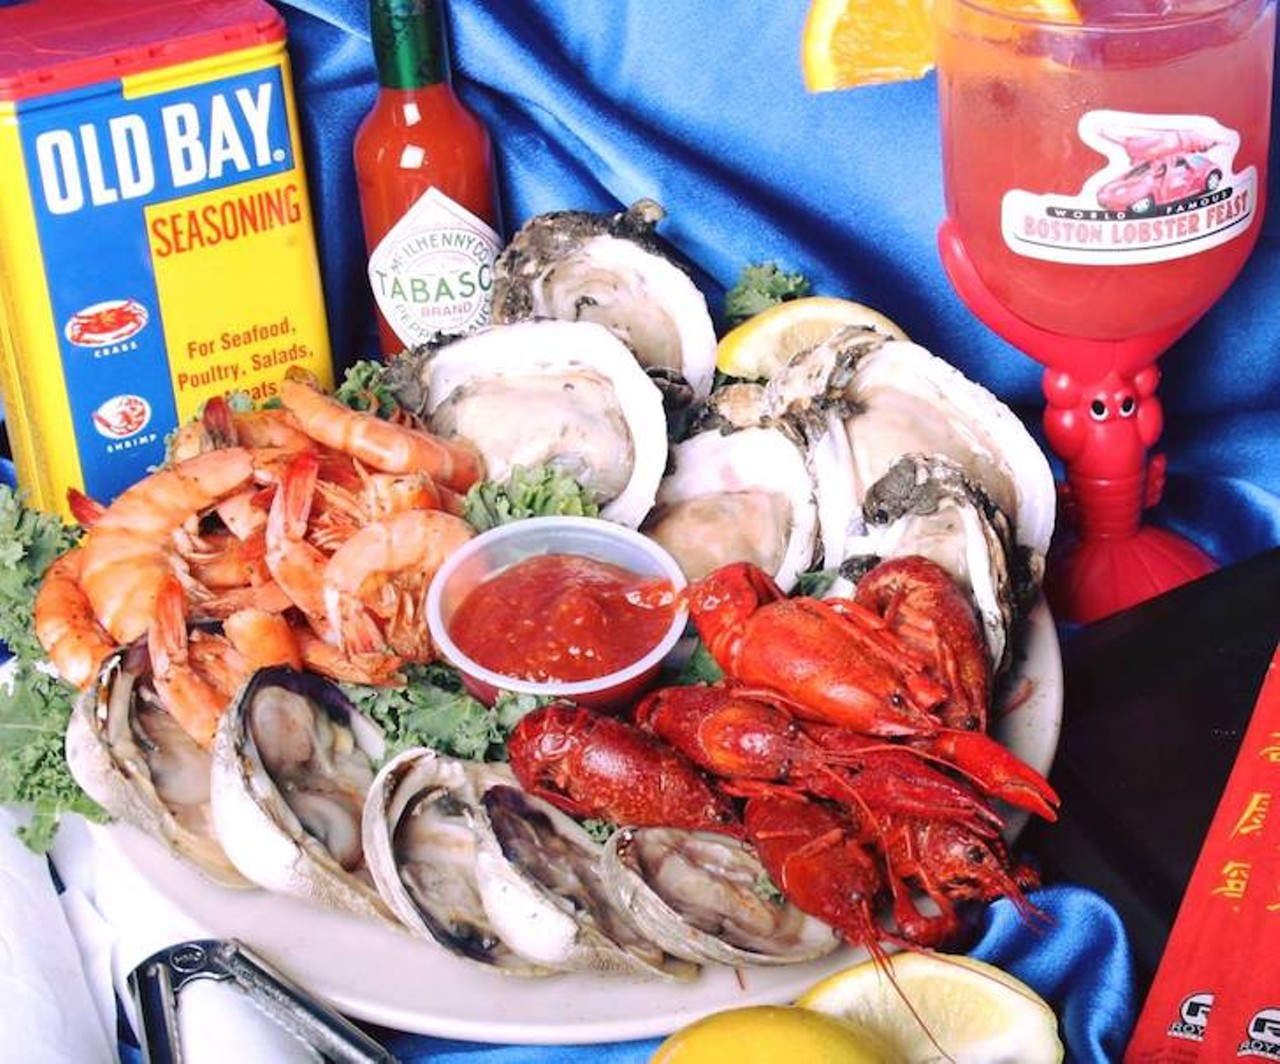 Boston Lobster Feast  
8731 International Drive, Orlando, 407-248-8606; also 6071 W. Irlo Bronson Memorial Highway, Kissimmee, 407-396-2606
This buffet is a seafood lover&#146;s paradise &#150; it comes baked, fried, smoked, boiled, steamed and even raw. Aside from featuring &#147;all you can eat&#148;  Maine lobsters, there are crab cakes, mussels, oysters, clams, shrimp, smoked and blackened salmon, octopus salad, baked mahi mahi, blue crab, sushi and so much more. And yes, they&#146;re the owners of that car with the giant lobster on it. 
Photo via Boston Lobster Feast/Facebook